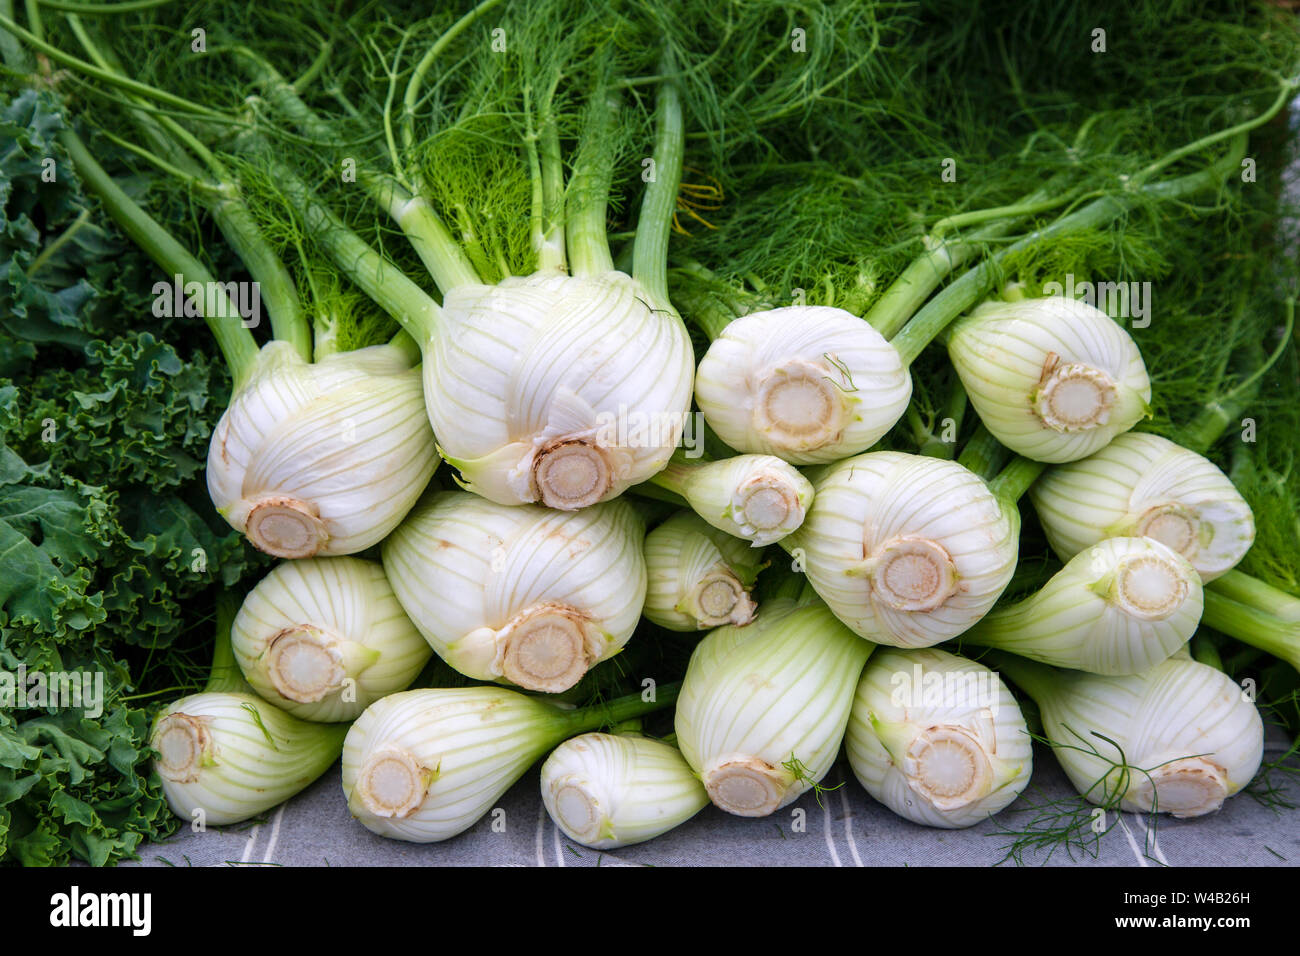 Display of fresh ripe organic fennel at the weekend farmer's market in the Okanagan Valley city of Penticton, British Columbia, Canada. Stock Photo